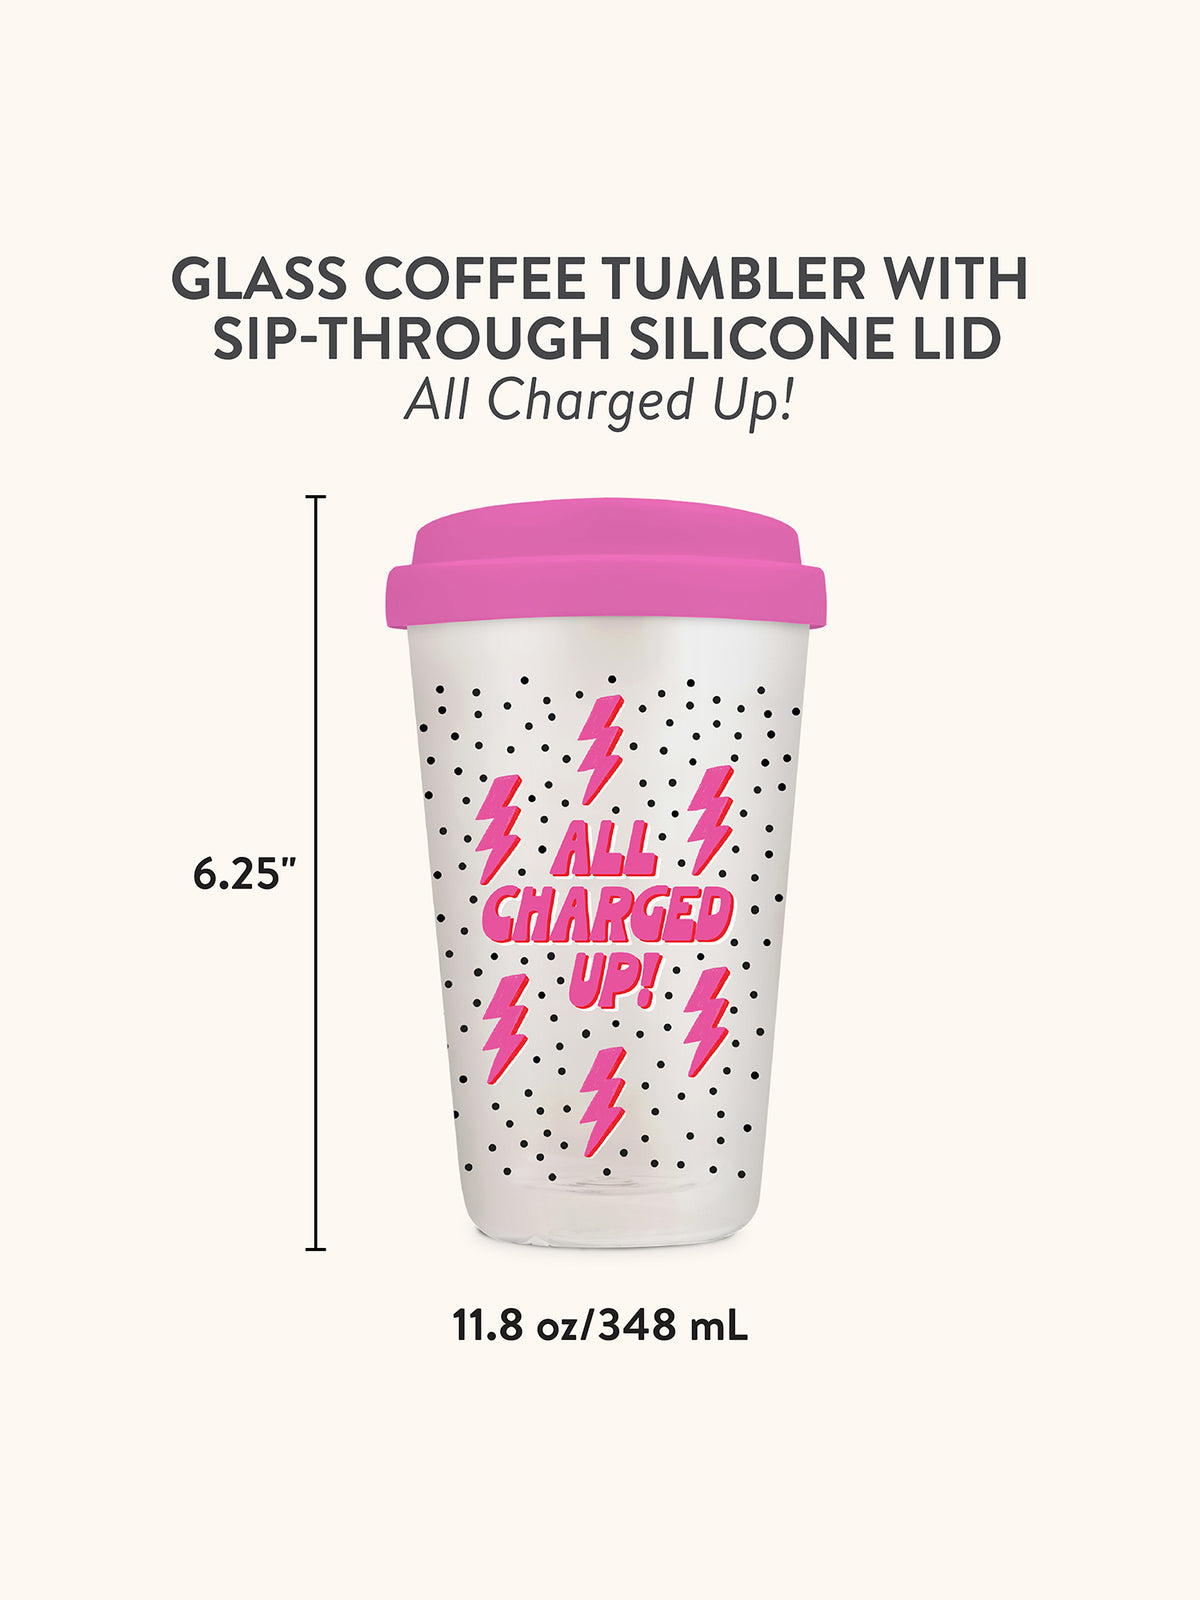 All Charged Up Glass Coffee Tumbler